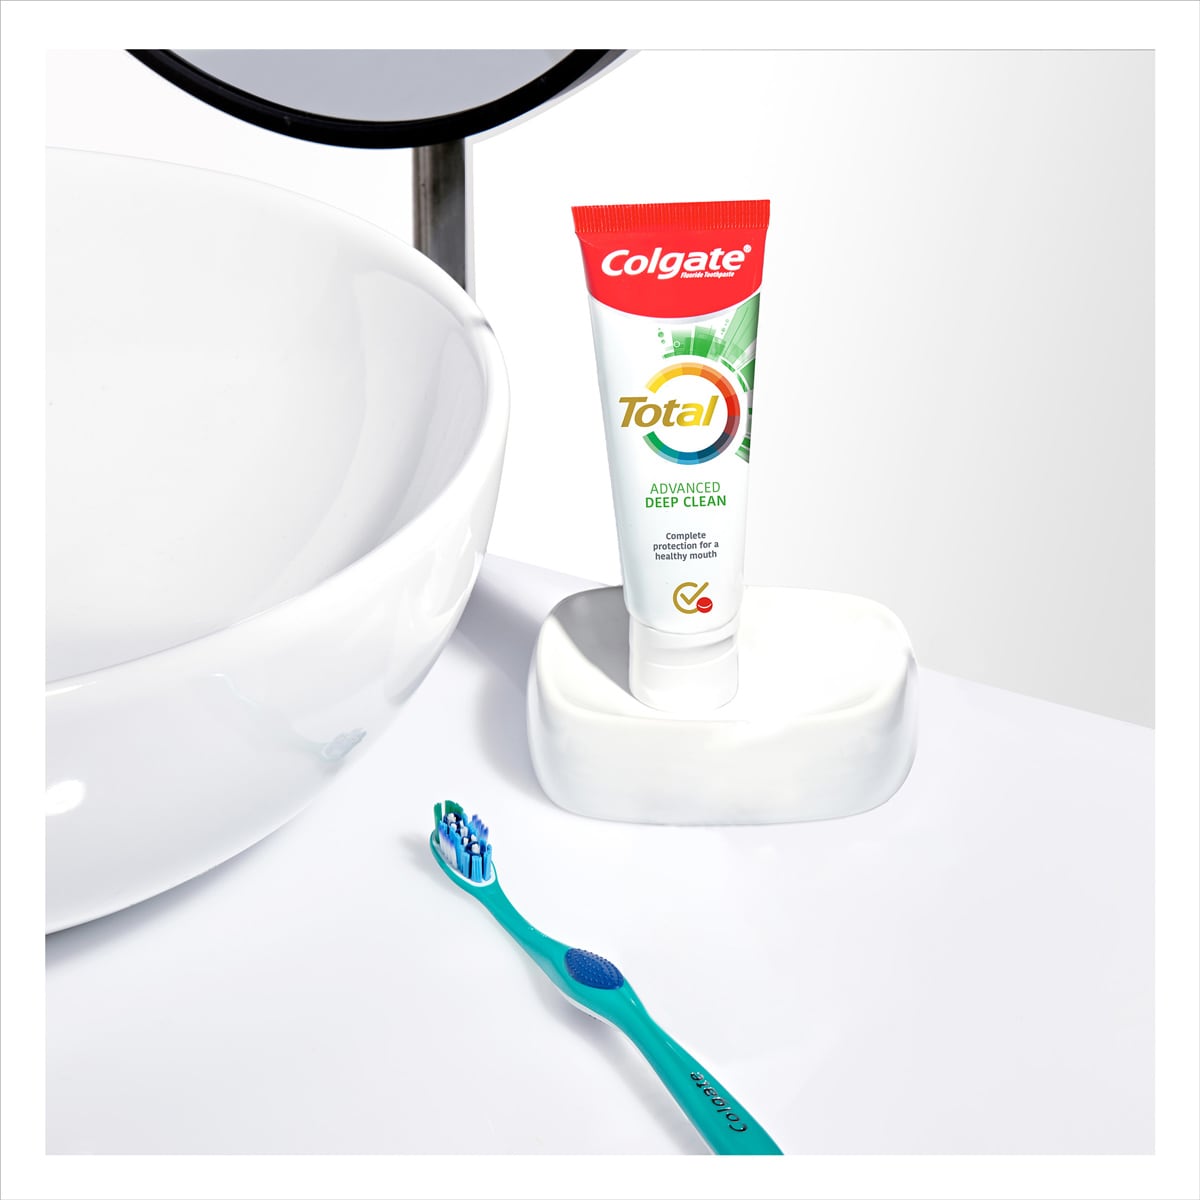 Colgate total advanced deep clean how to use